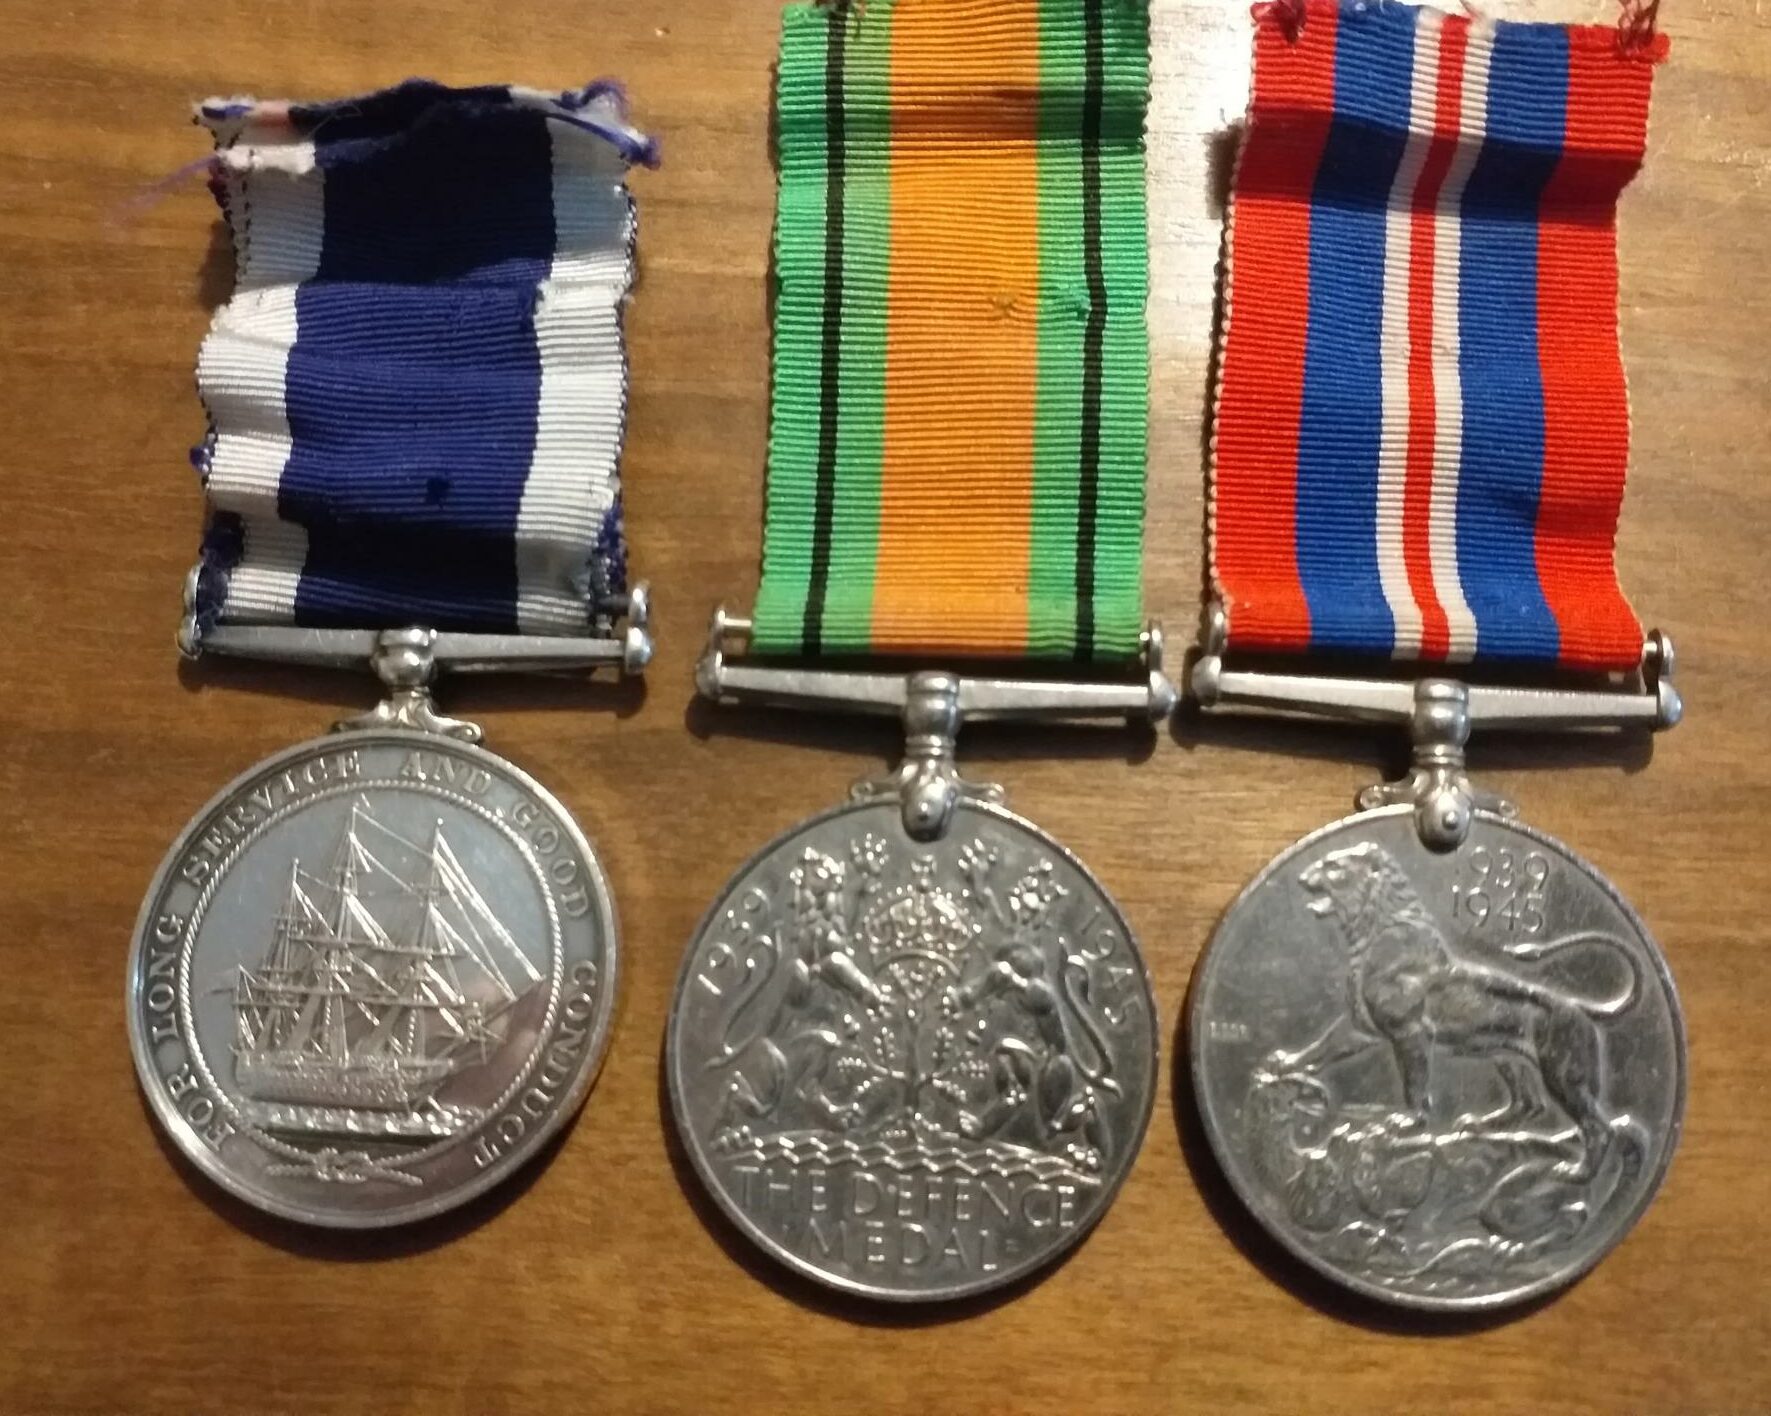 Janet Ramsay's service medals.